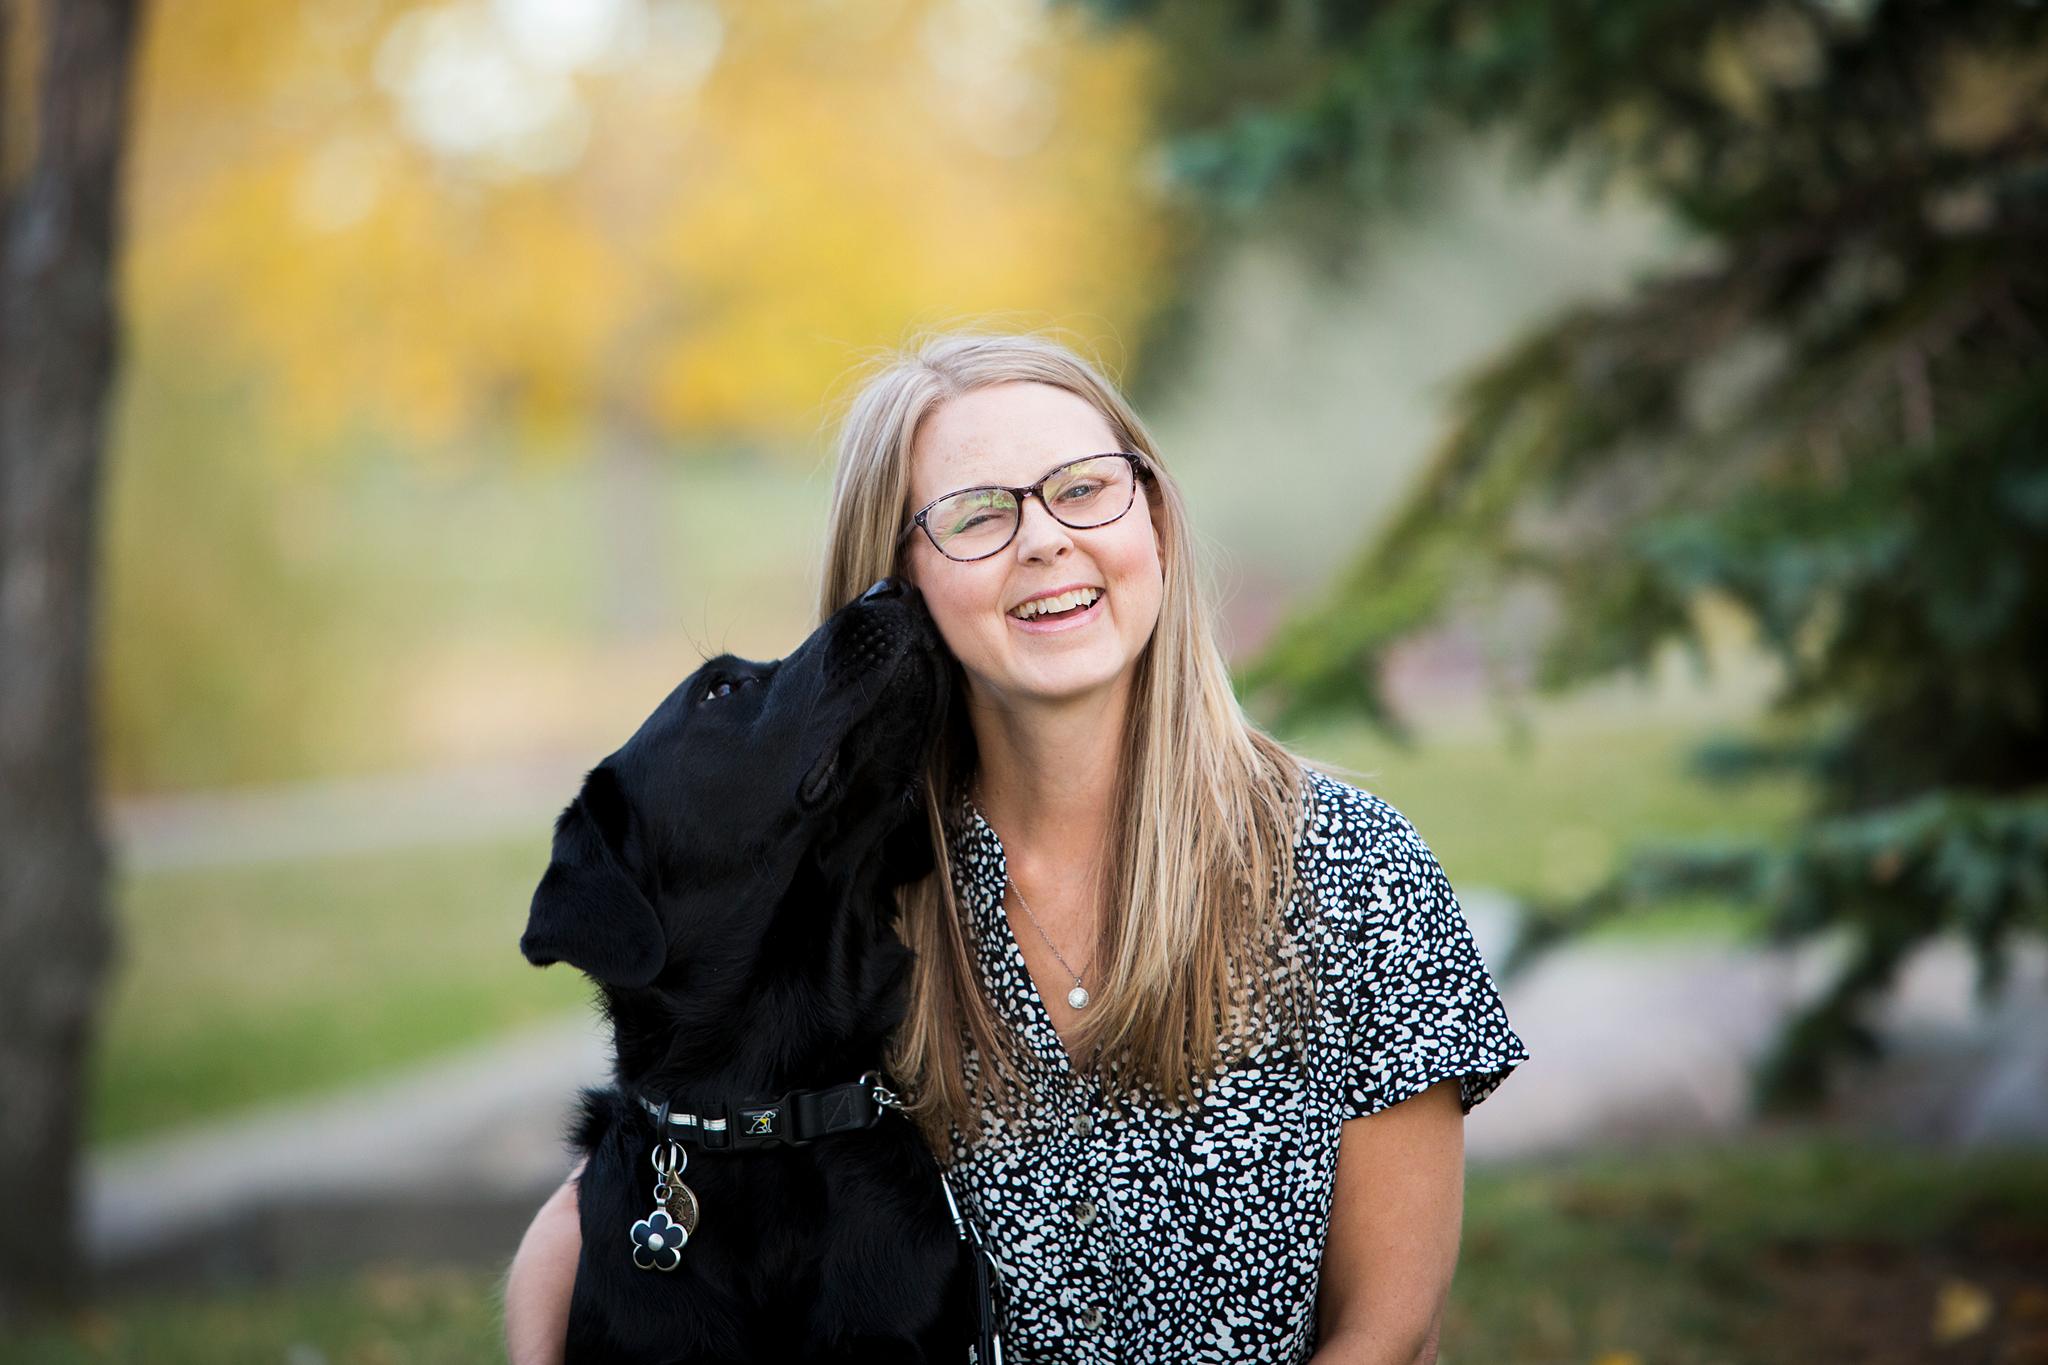 Becki is smiling next to her CNIB guide dog, Lulu who is sniffing her ear.